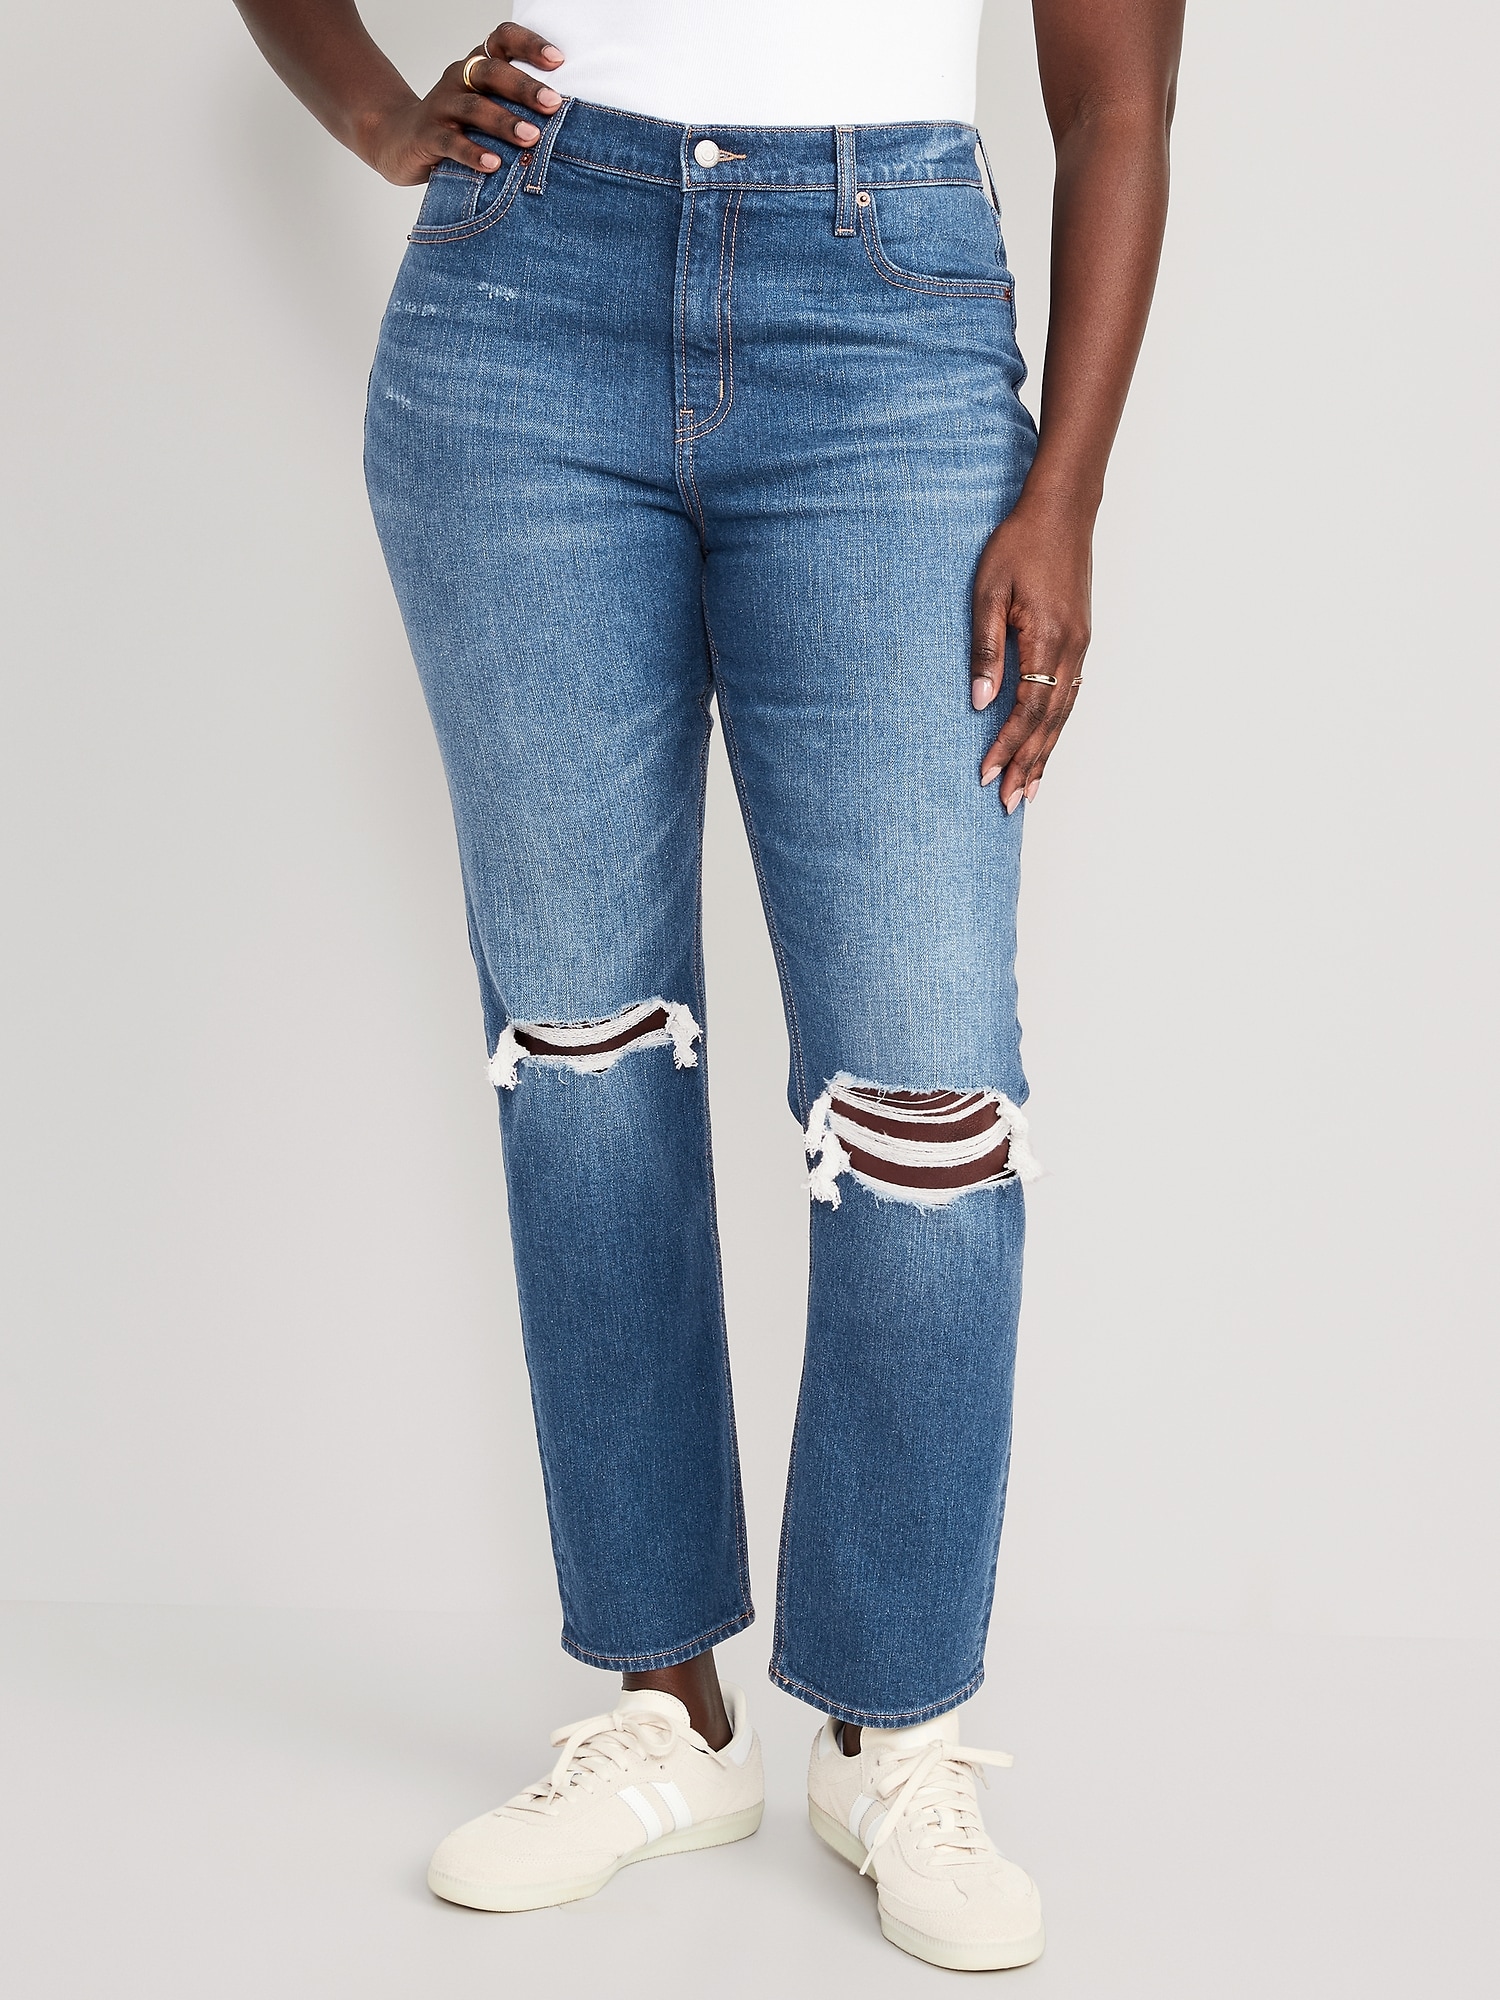 Mid-Rise Boyfriend Straight Ripped Jeans for Women | Old Navy